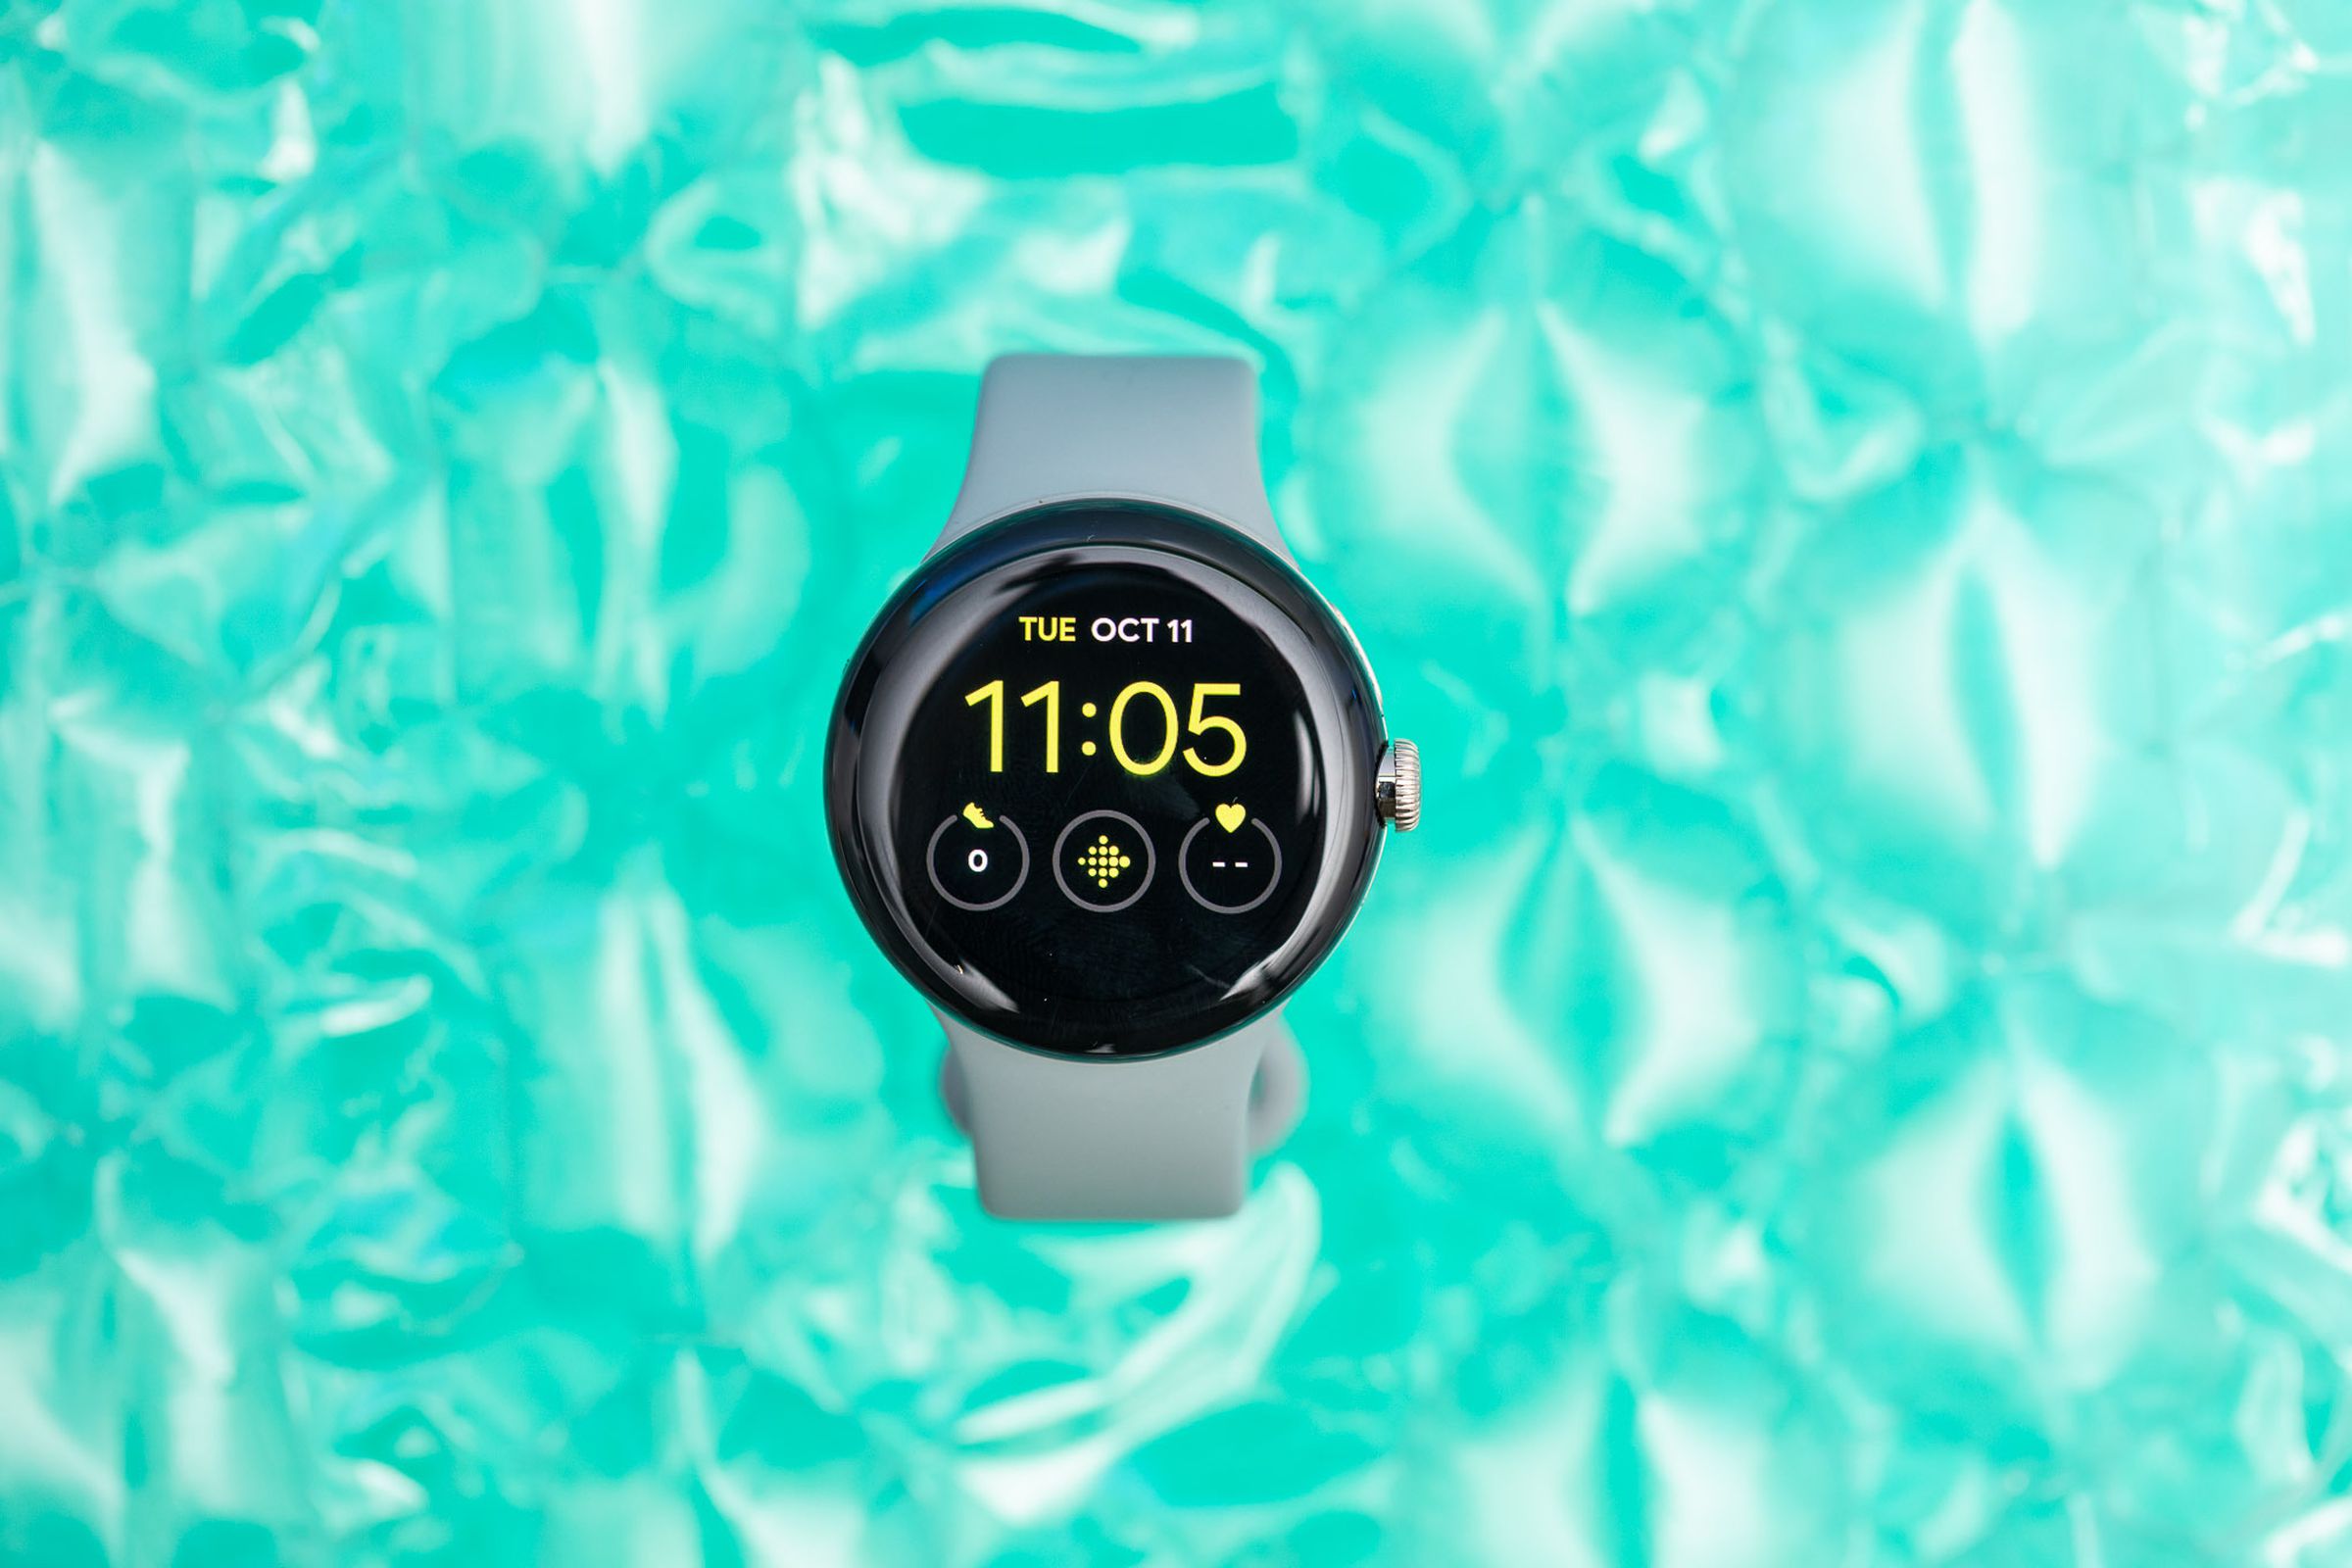 Pixel Watch on top of air bubbles